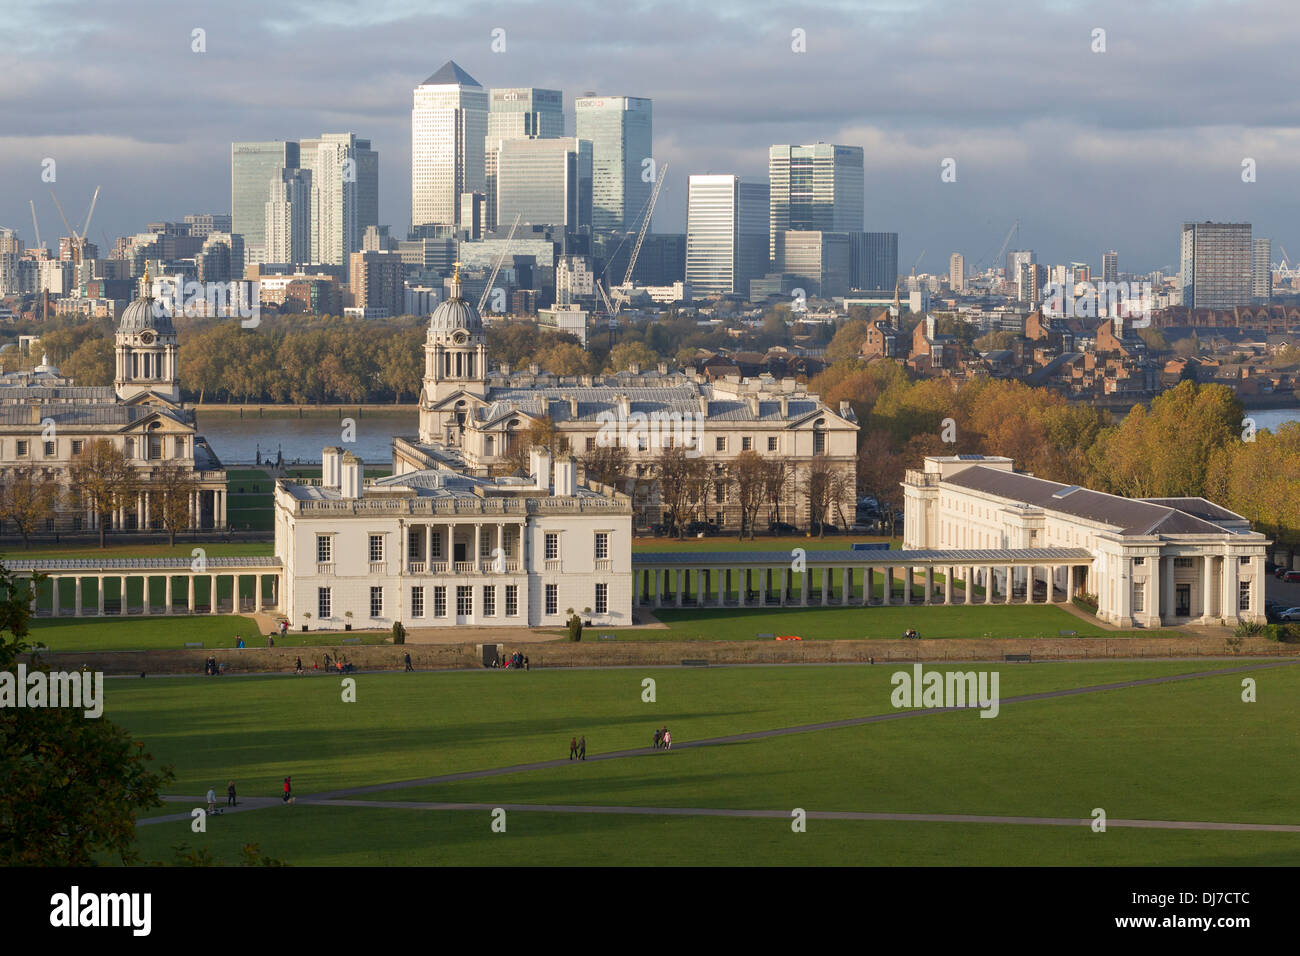 View of Greenwich Naval College and the City of London from the Royal Observatory in Greenwich Stock Photo